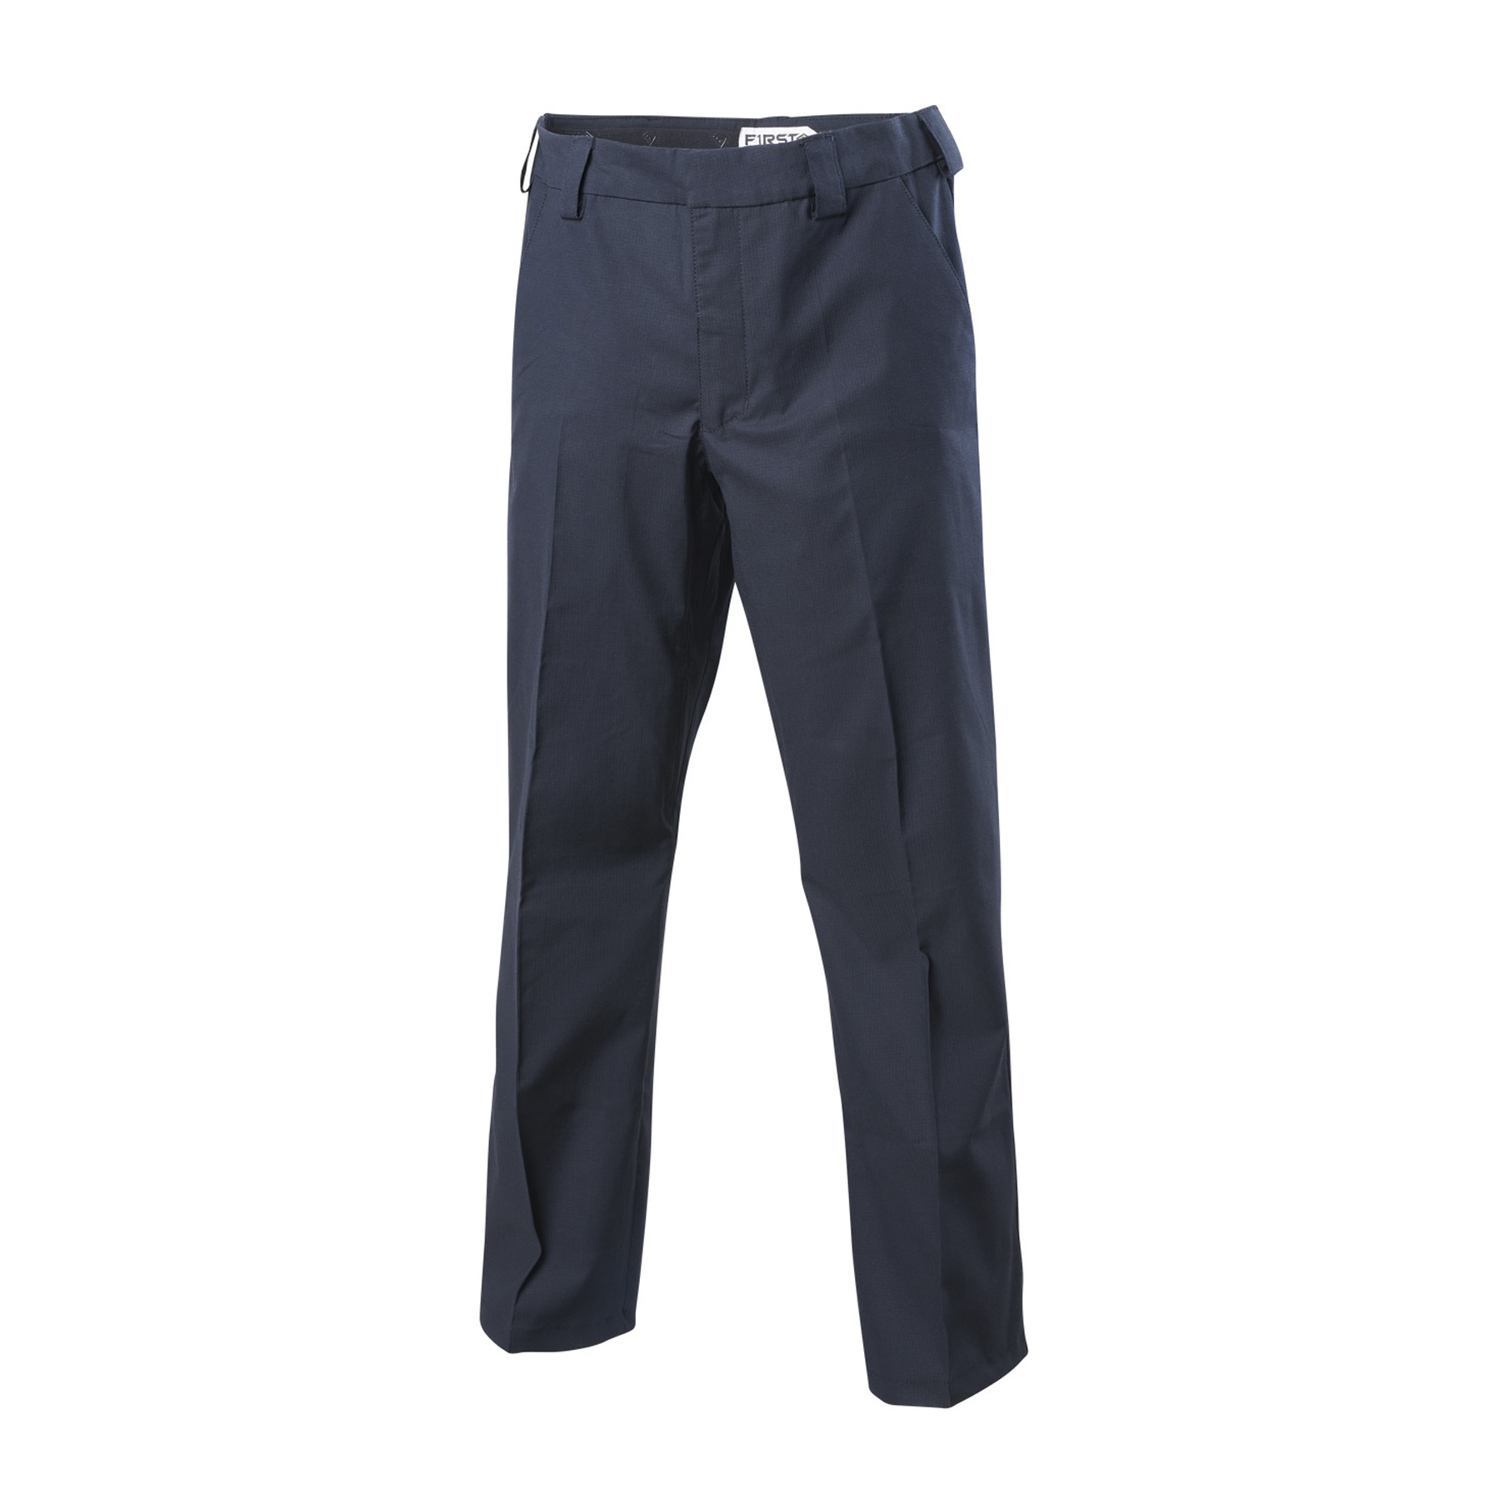 First Tactical Men's Cotton Station Pants